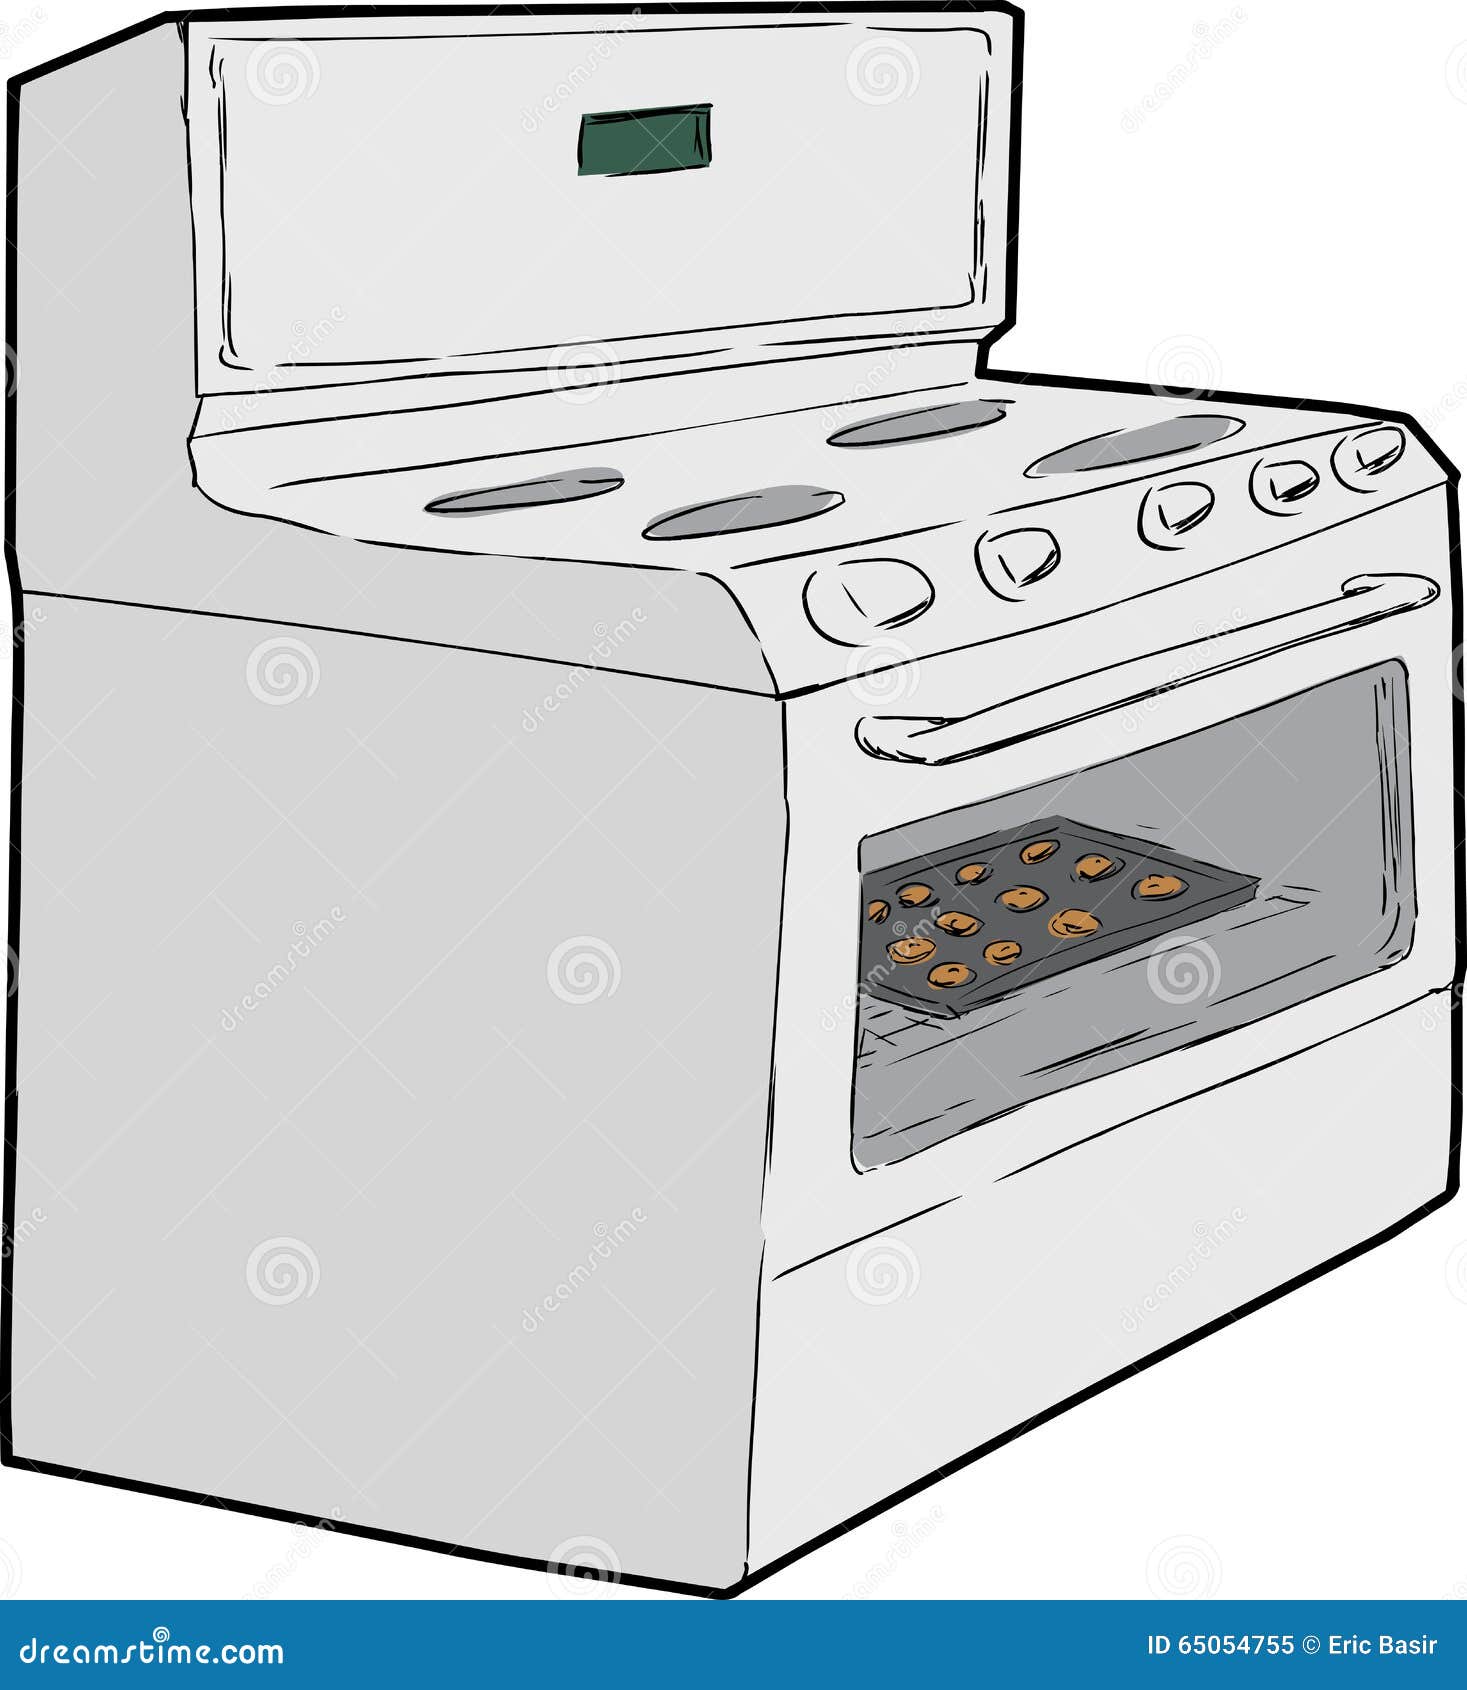 Single Oven With Cookies Inside Stock Illustration ...